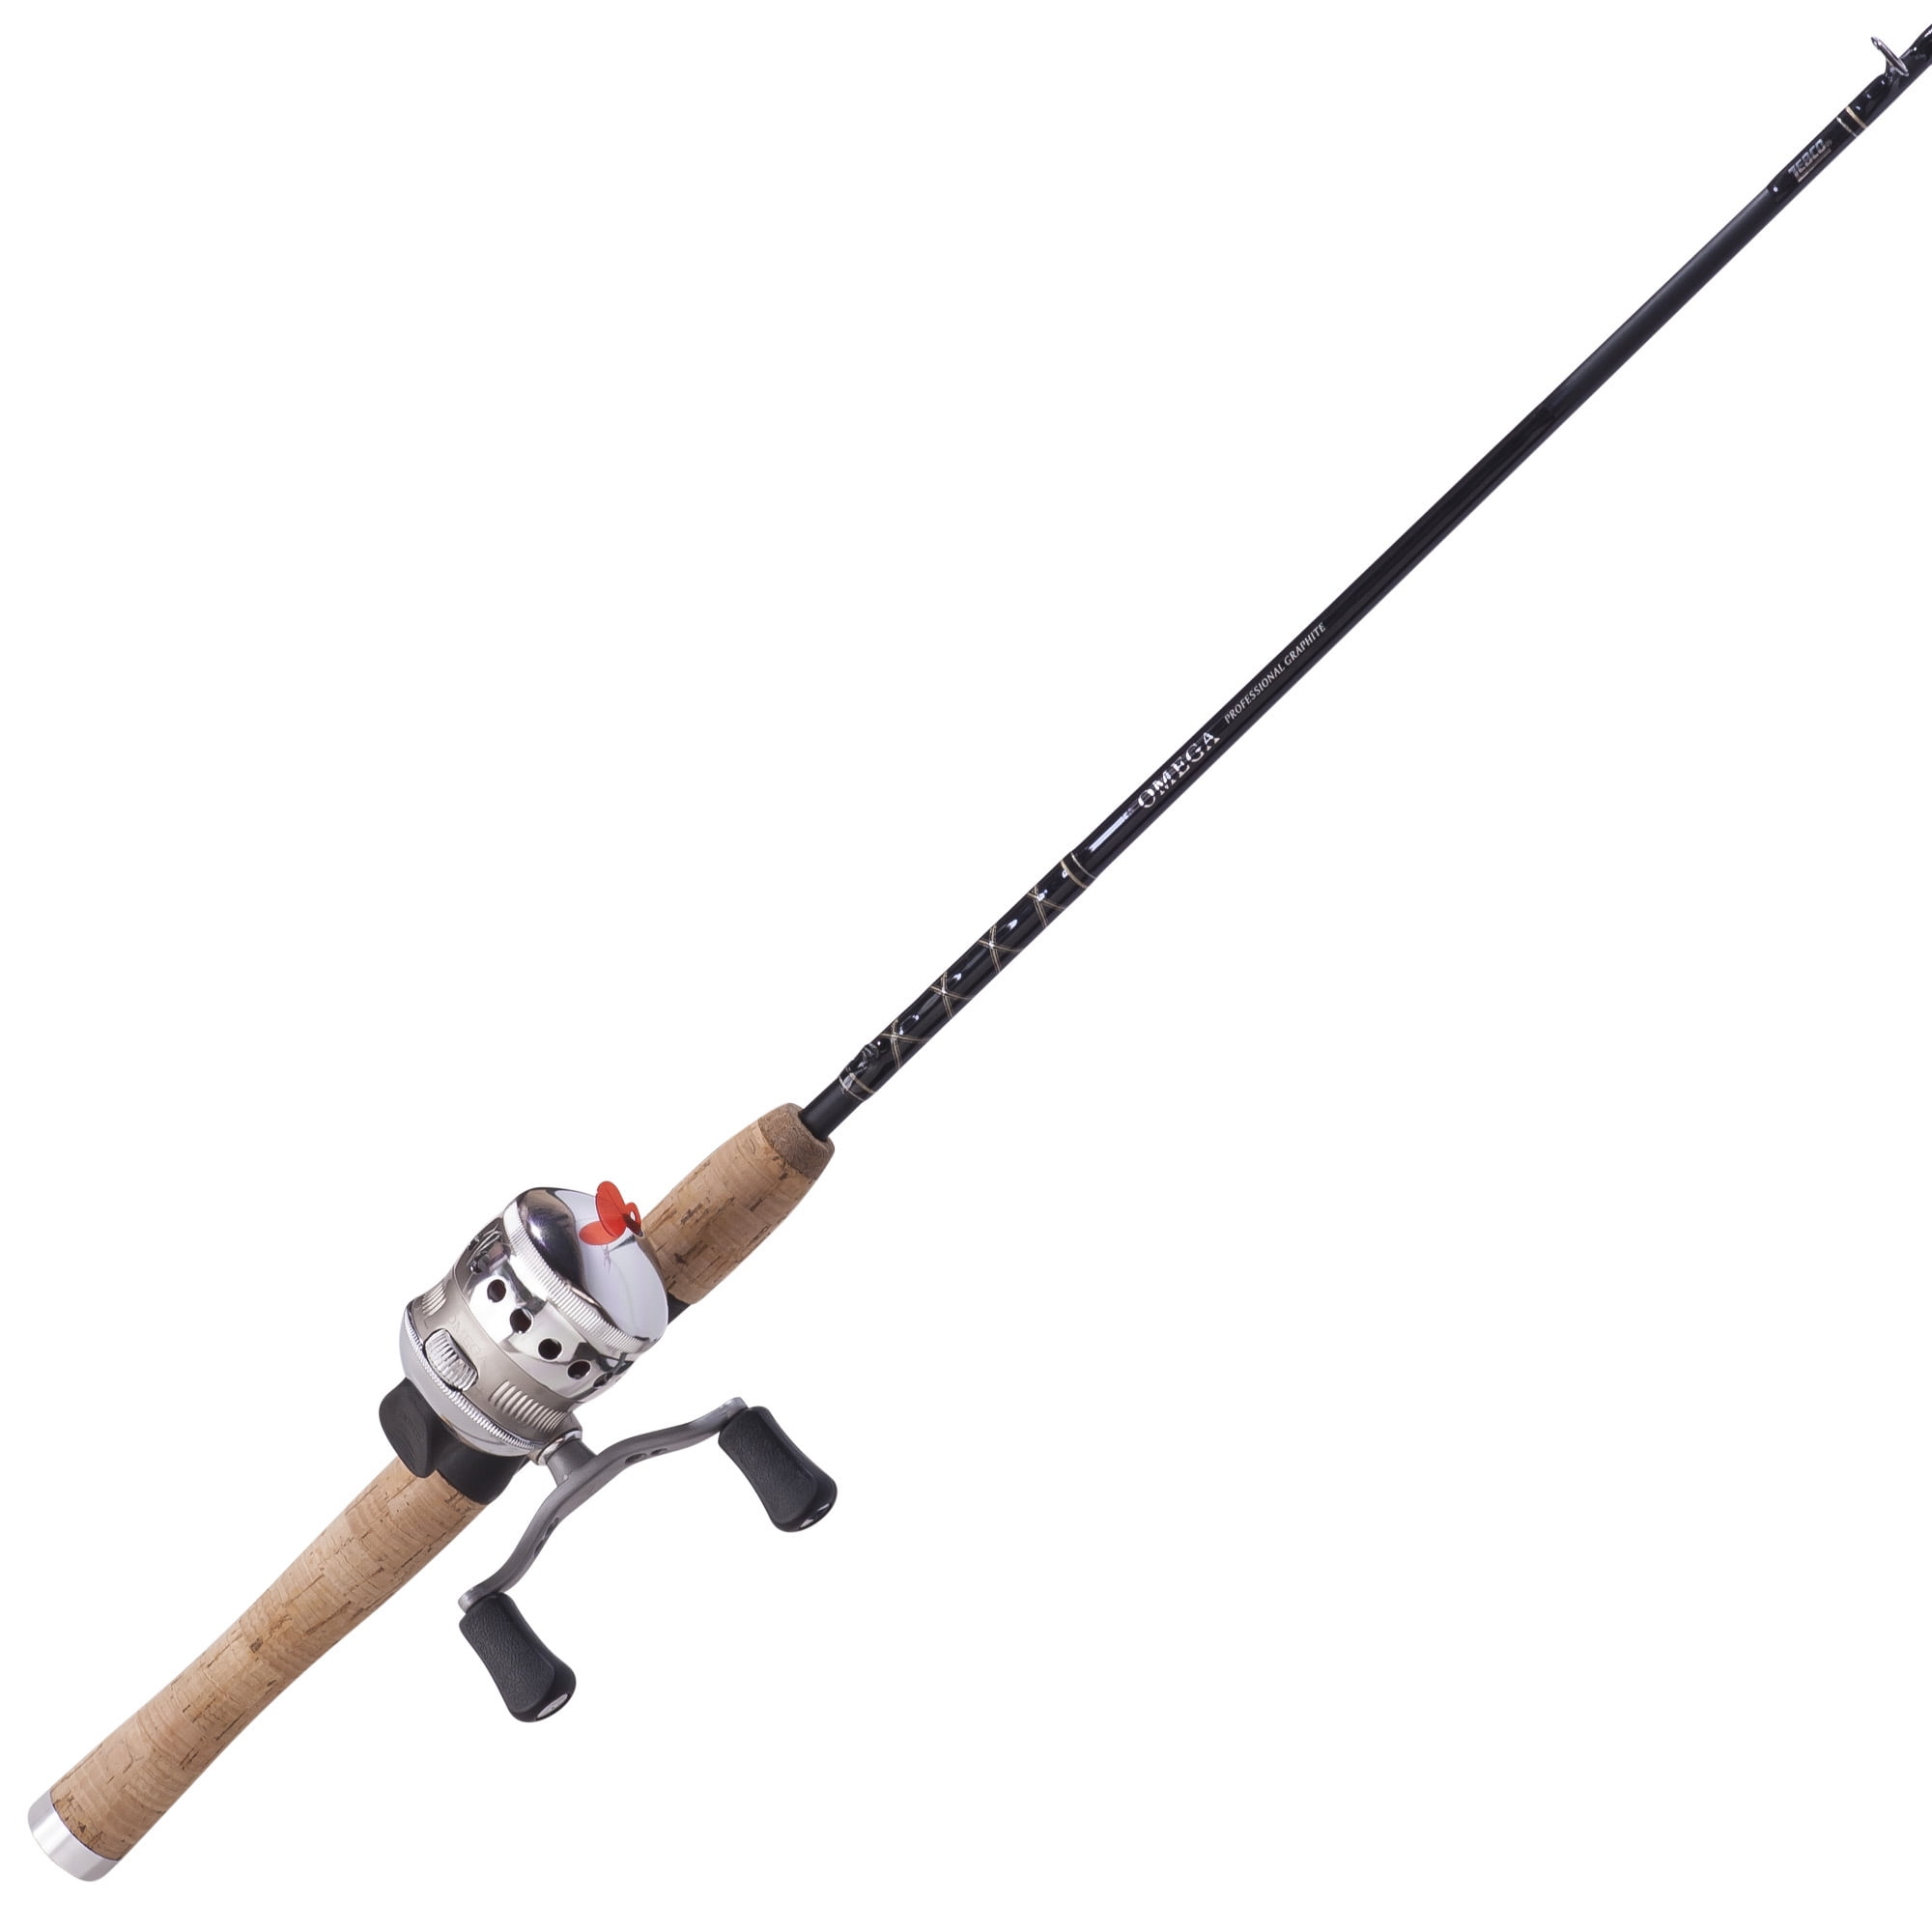 Zebco Omega Spincast Reel and Fishing Rod Combo, 5-Foot 6-Inch 2-Piece IM6  Graphite Fishing Pole, Natural Cork Rod Handle, Size 20 Reel, Pre-spooled